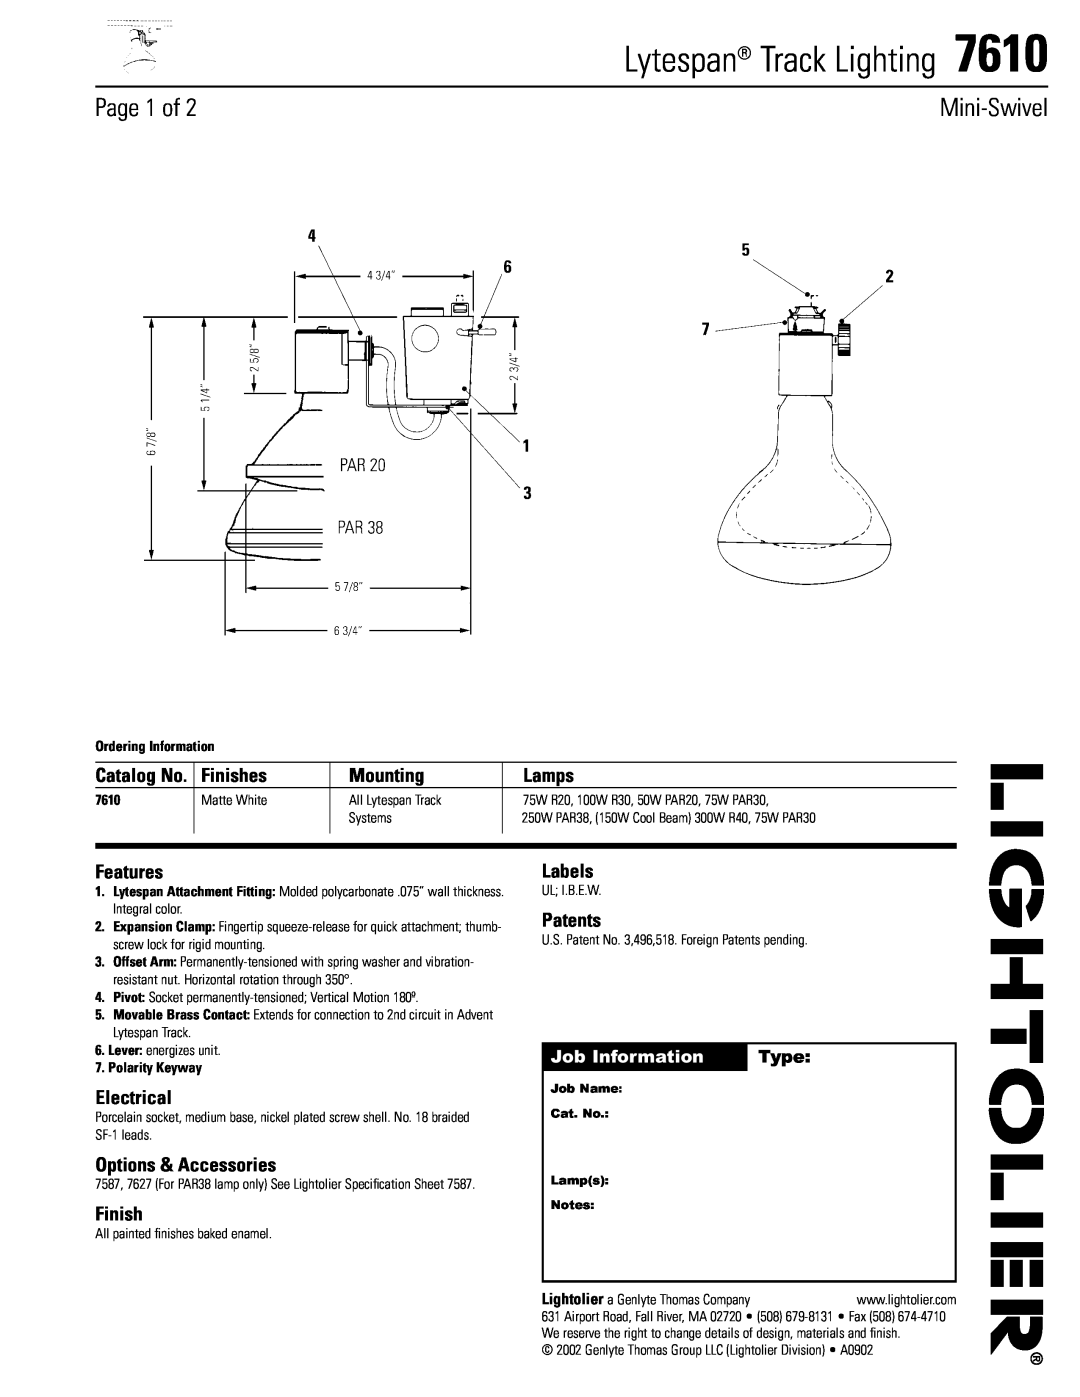 Lightolier 7610 specifications Finishes, Mounting, Lamps, Features, Electrical, Options & Accessories, Labels, Patents 